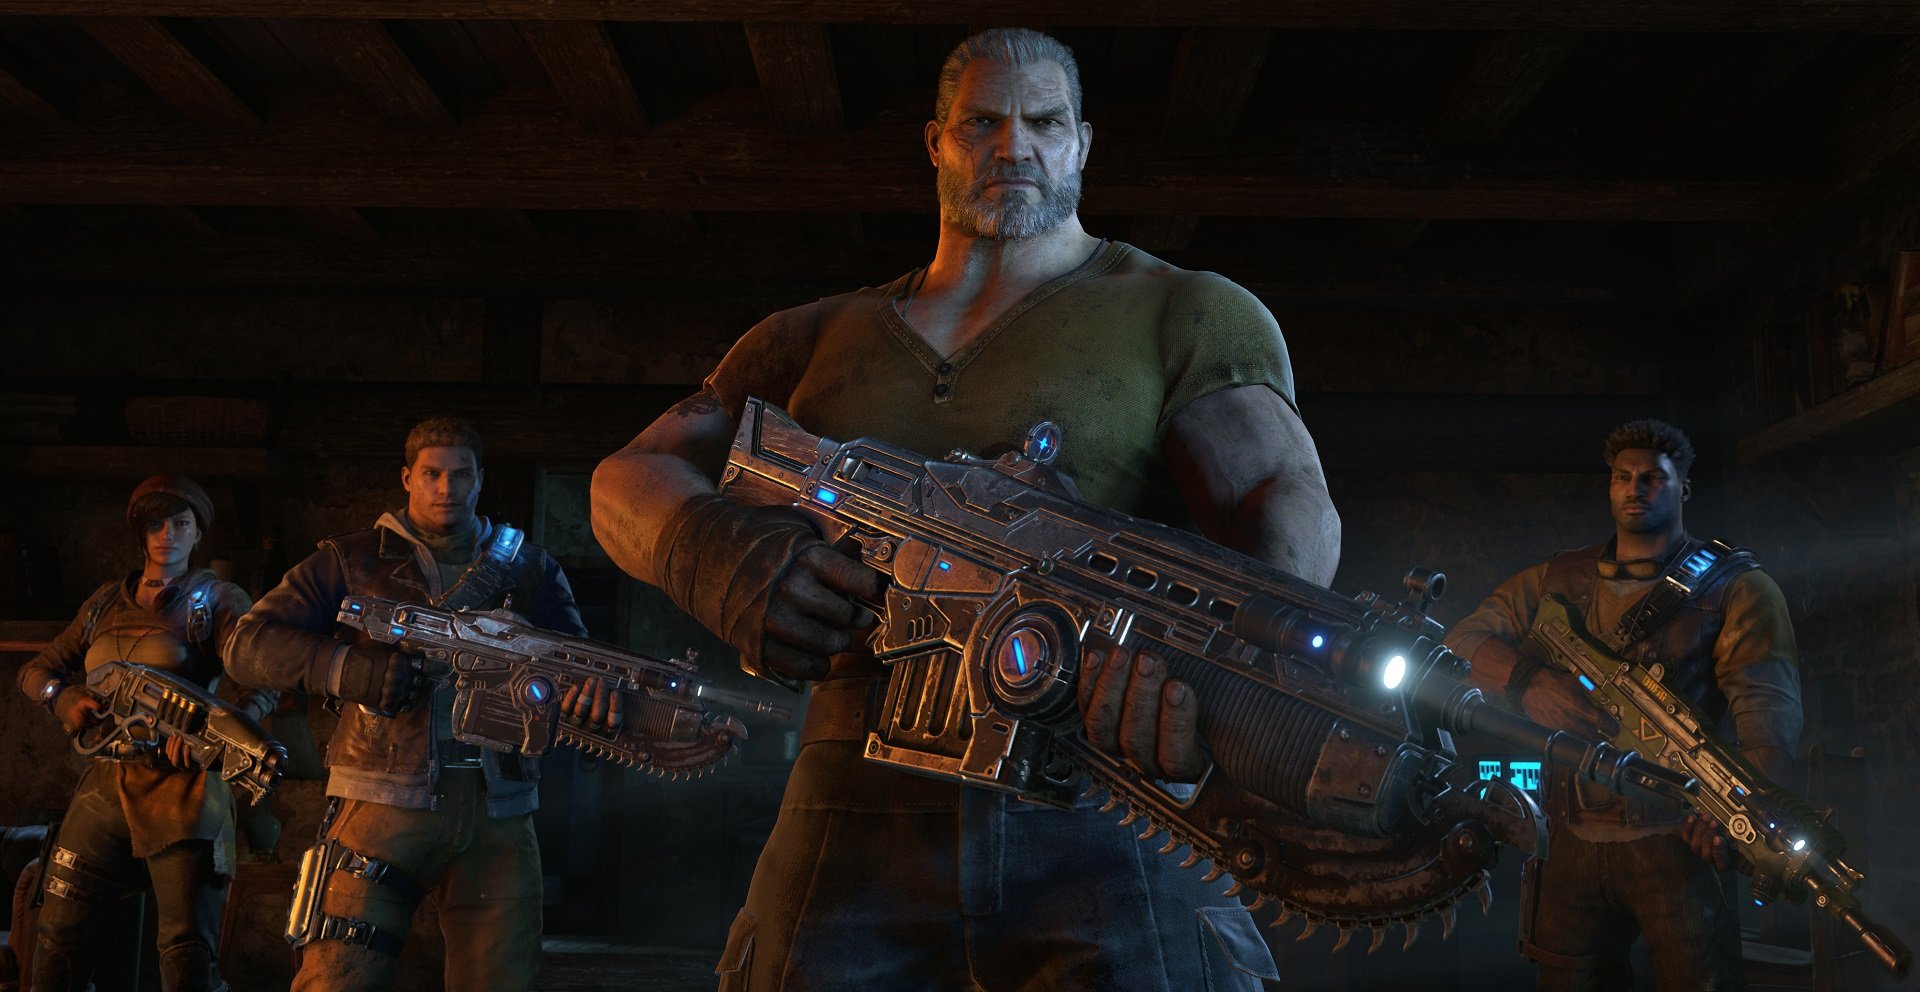 Gears of War 3 event dishes up 10x XP – Destructoid